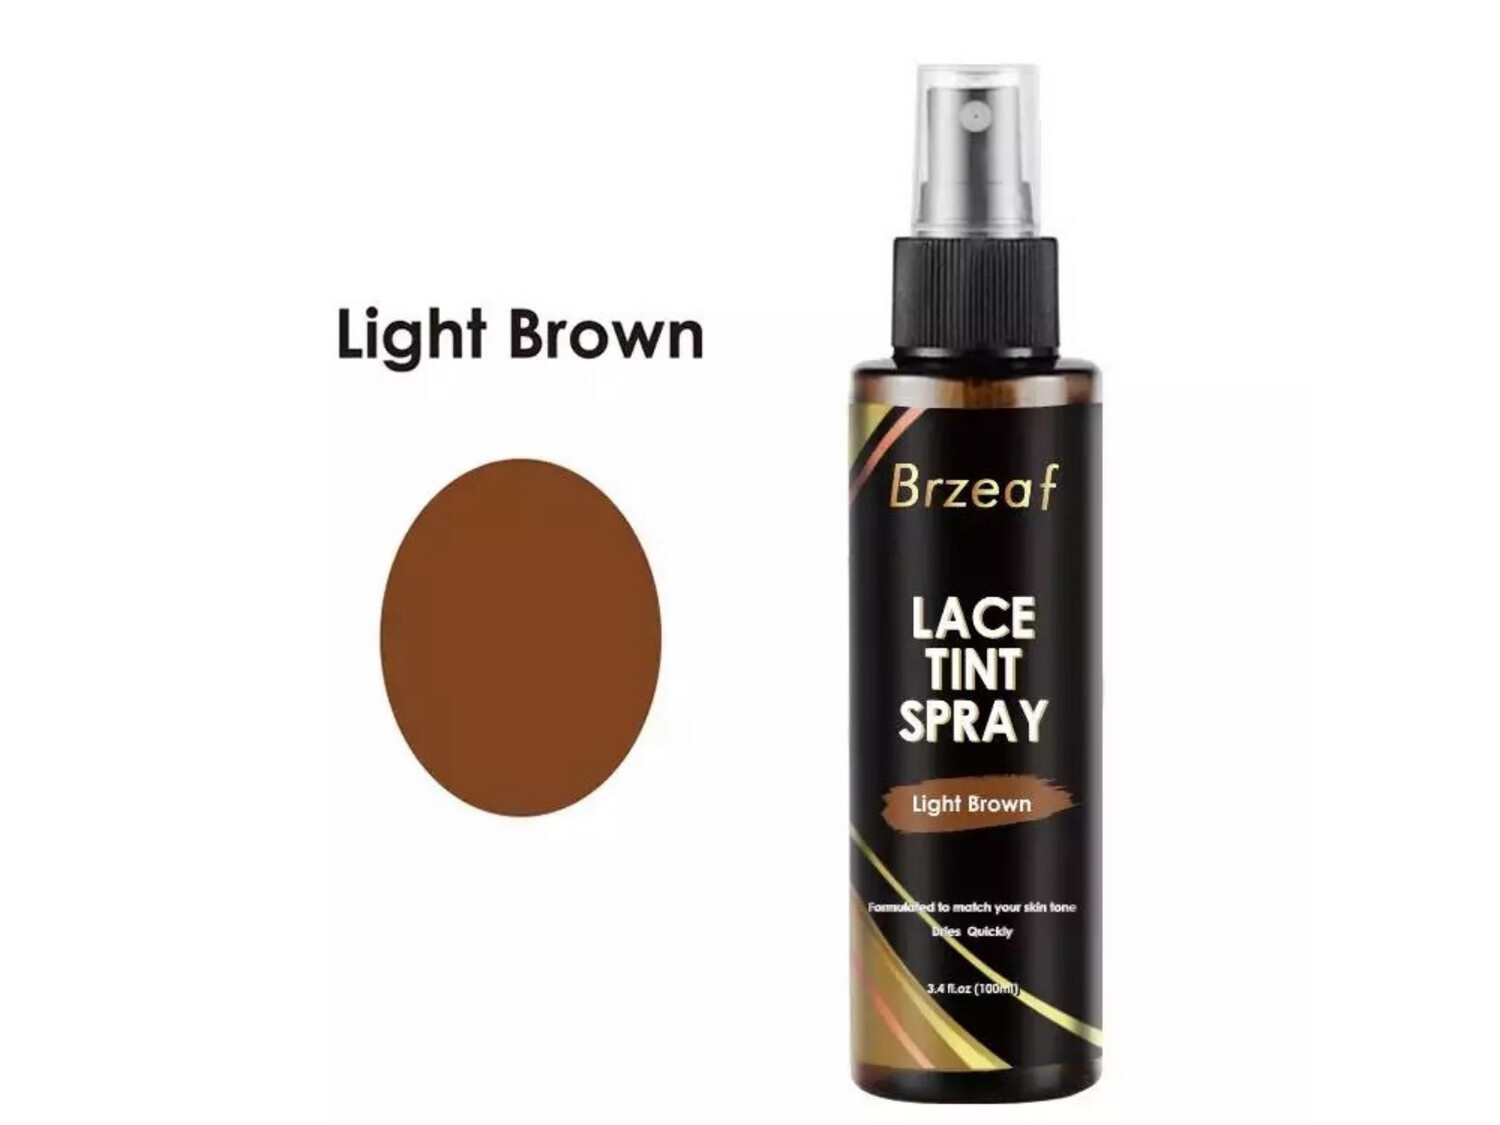 Closure Frontal Lace Tint Spray